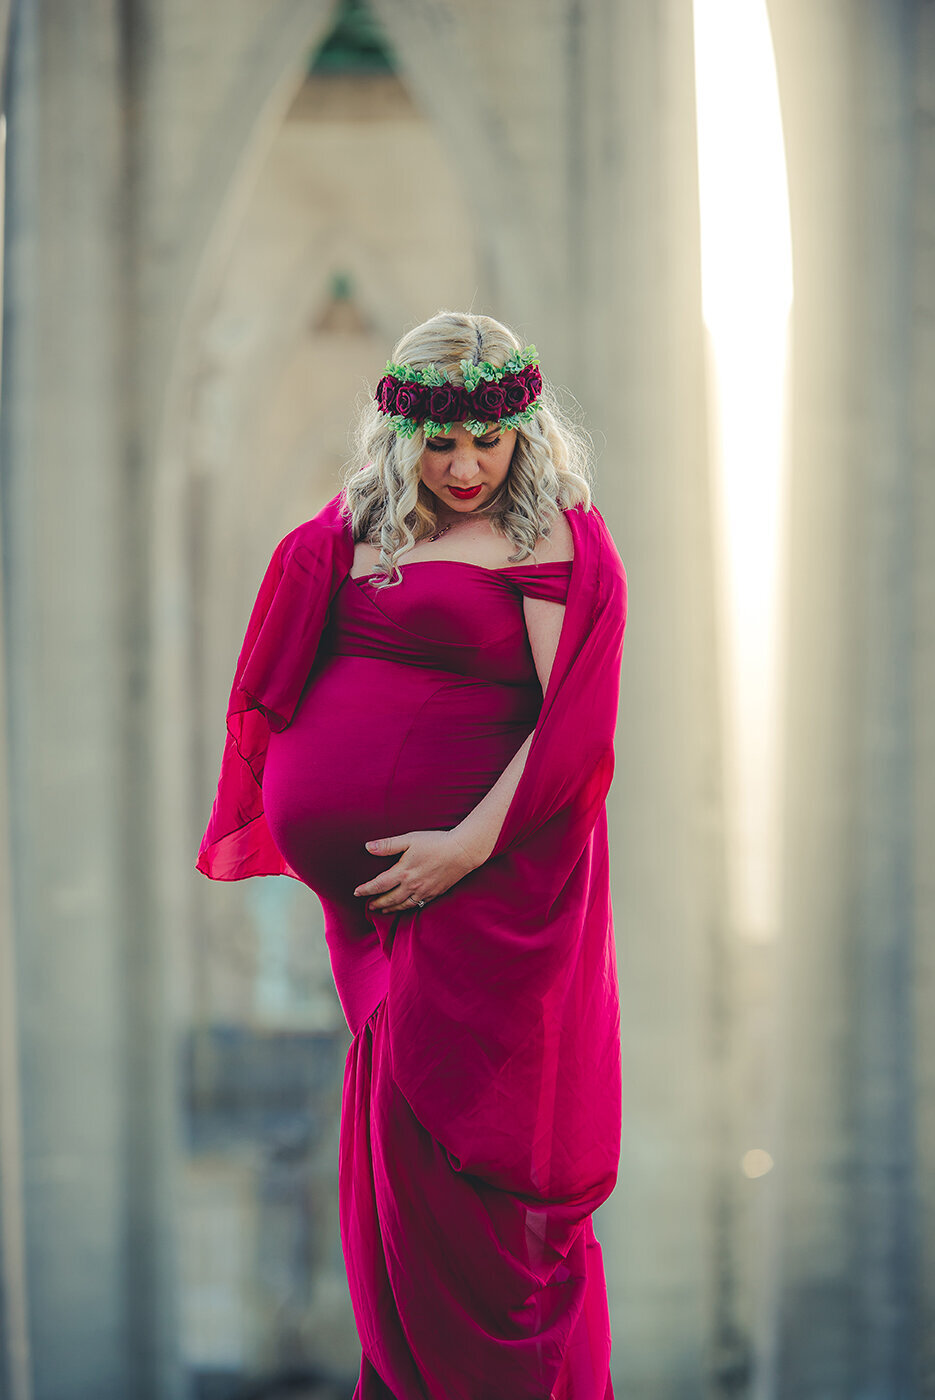 Expectant mother in red dress